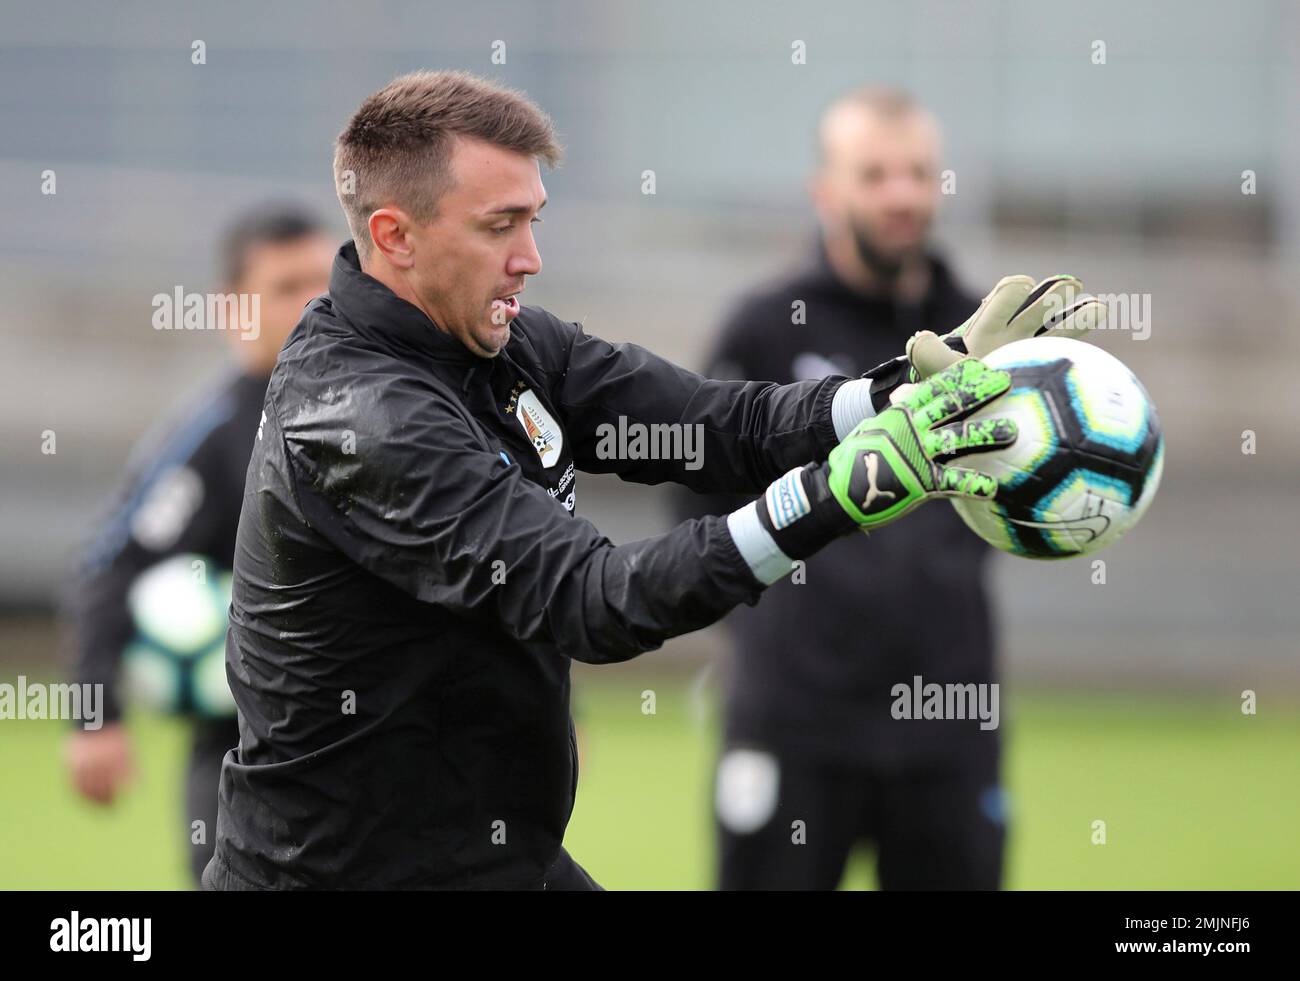 Uruguay goalkeeper Fernando Muslera catches a ball during a practice  session in Porto Alegre, Brazil, Wednesday, June 19, 2019. Uruguay will  face Japan tomorrow in a Copa America Group C soccer match. (